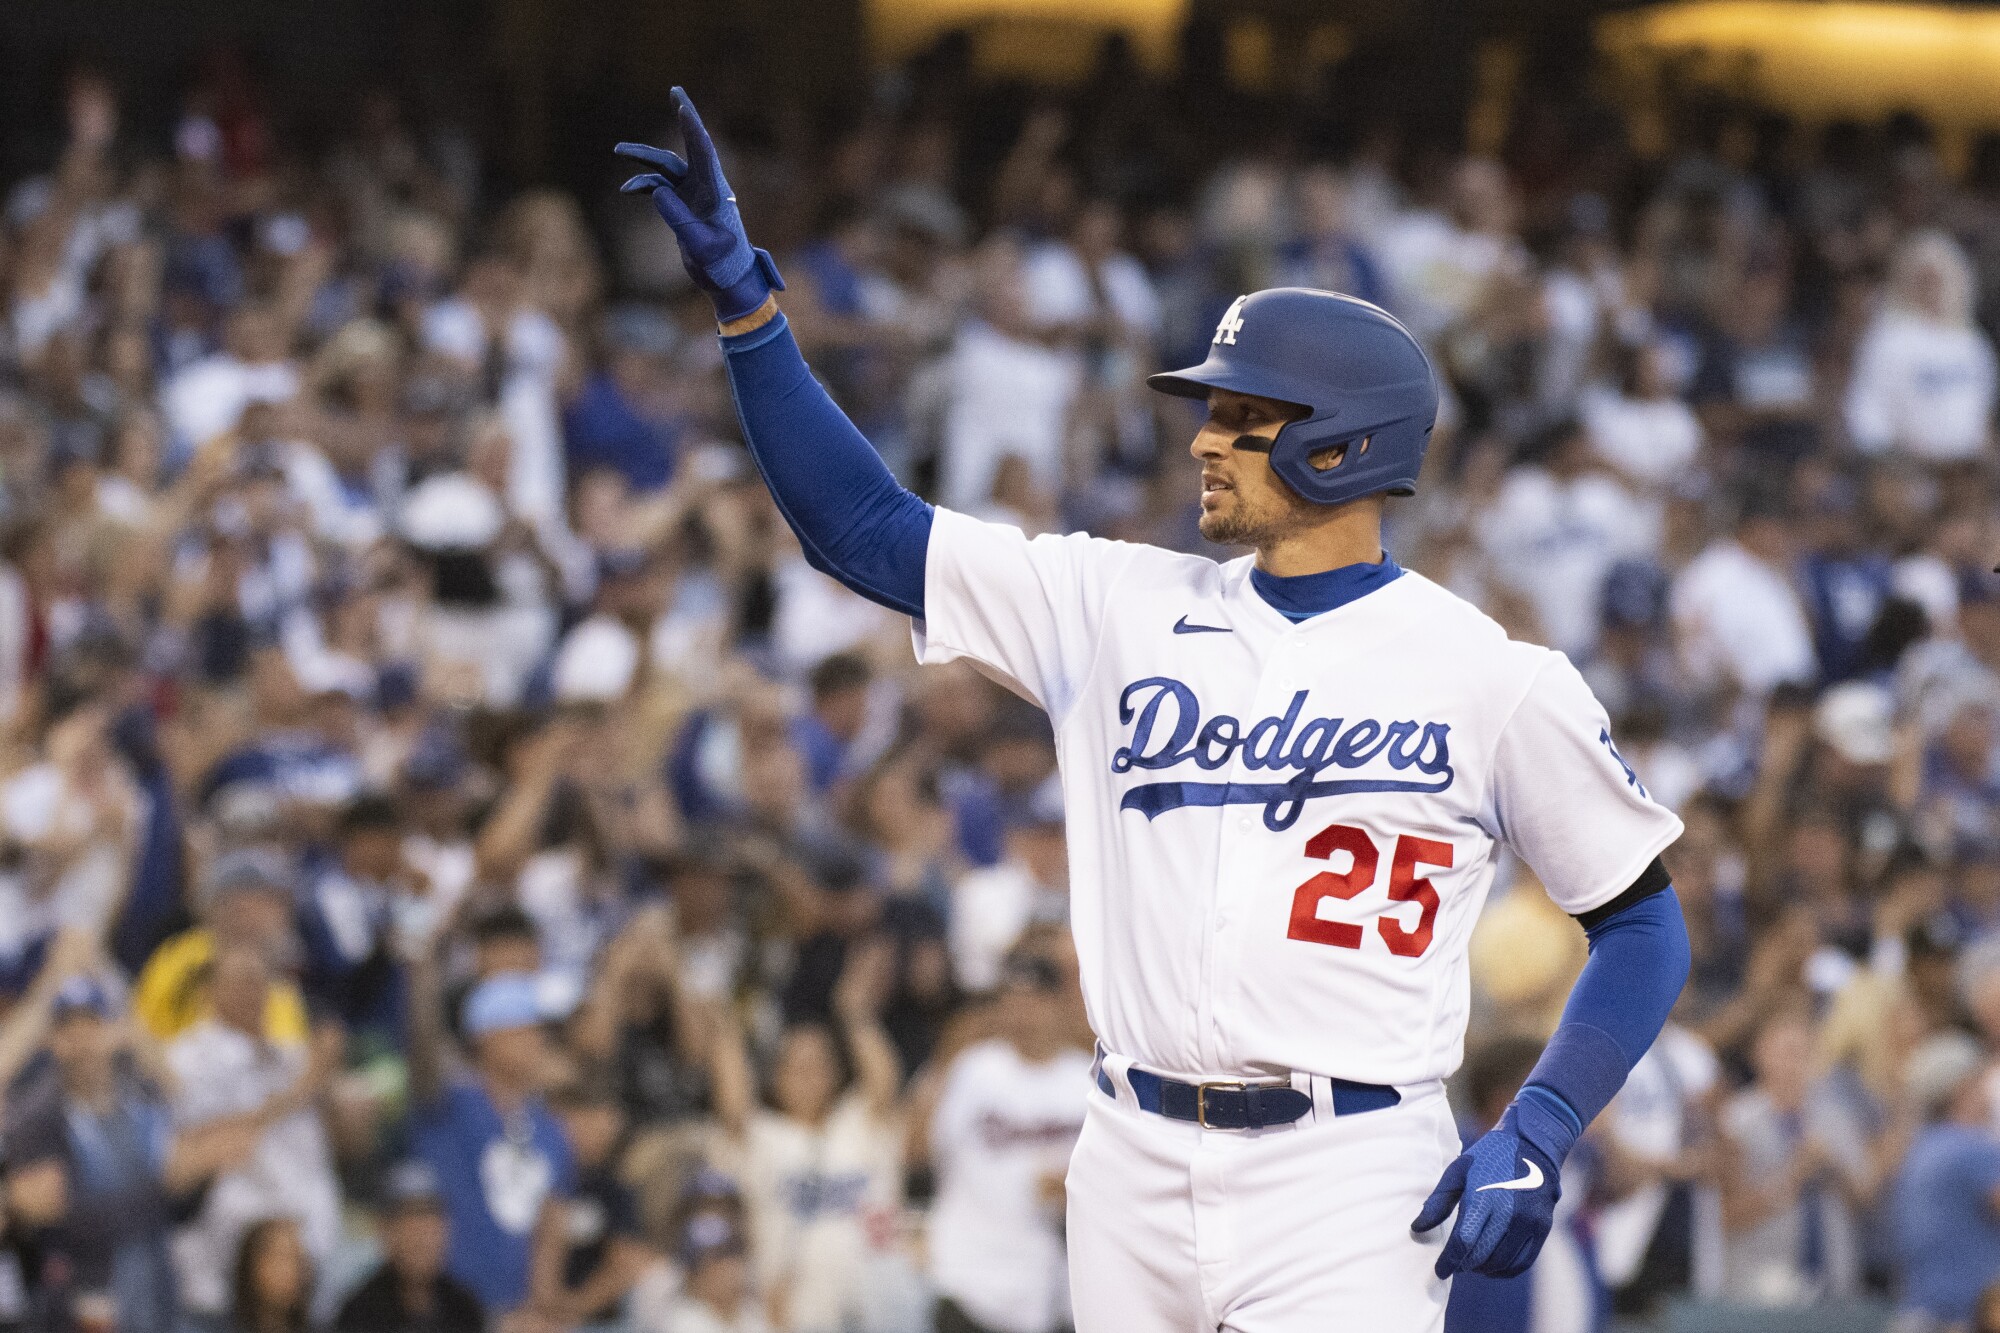 Dodgers' Trayce Thompson gestures to the stands after hitting a three-run home run